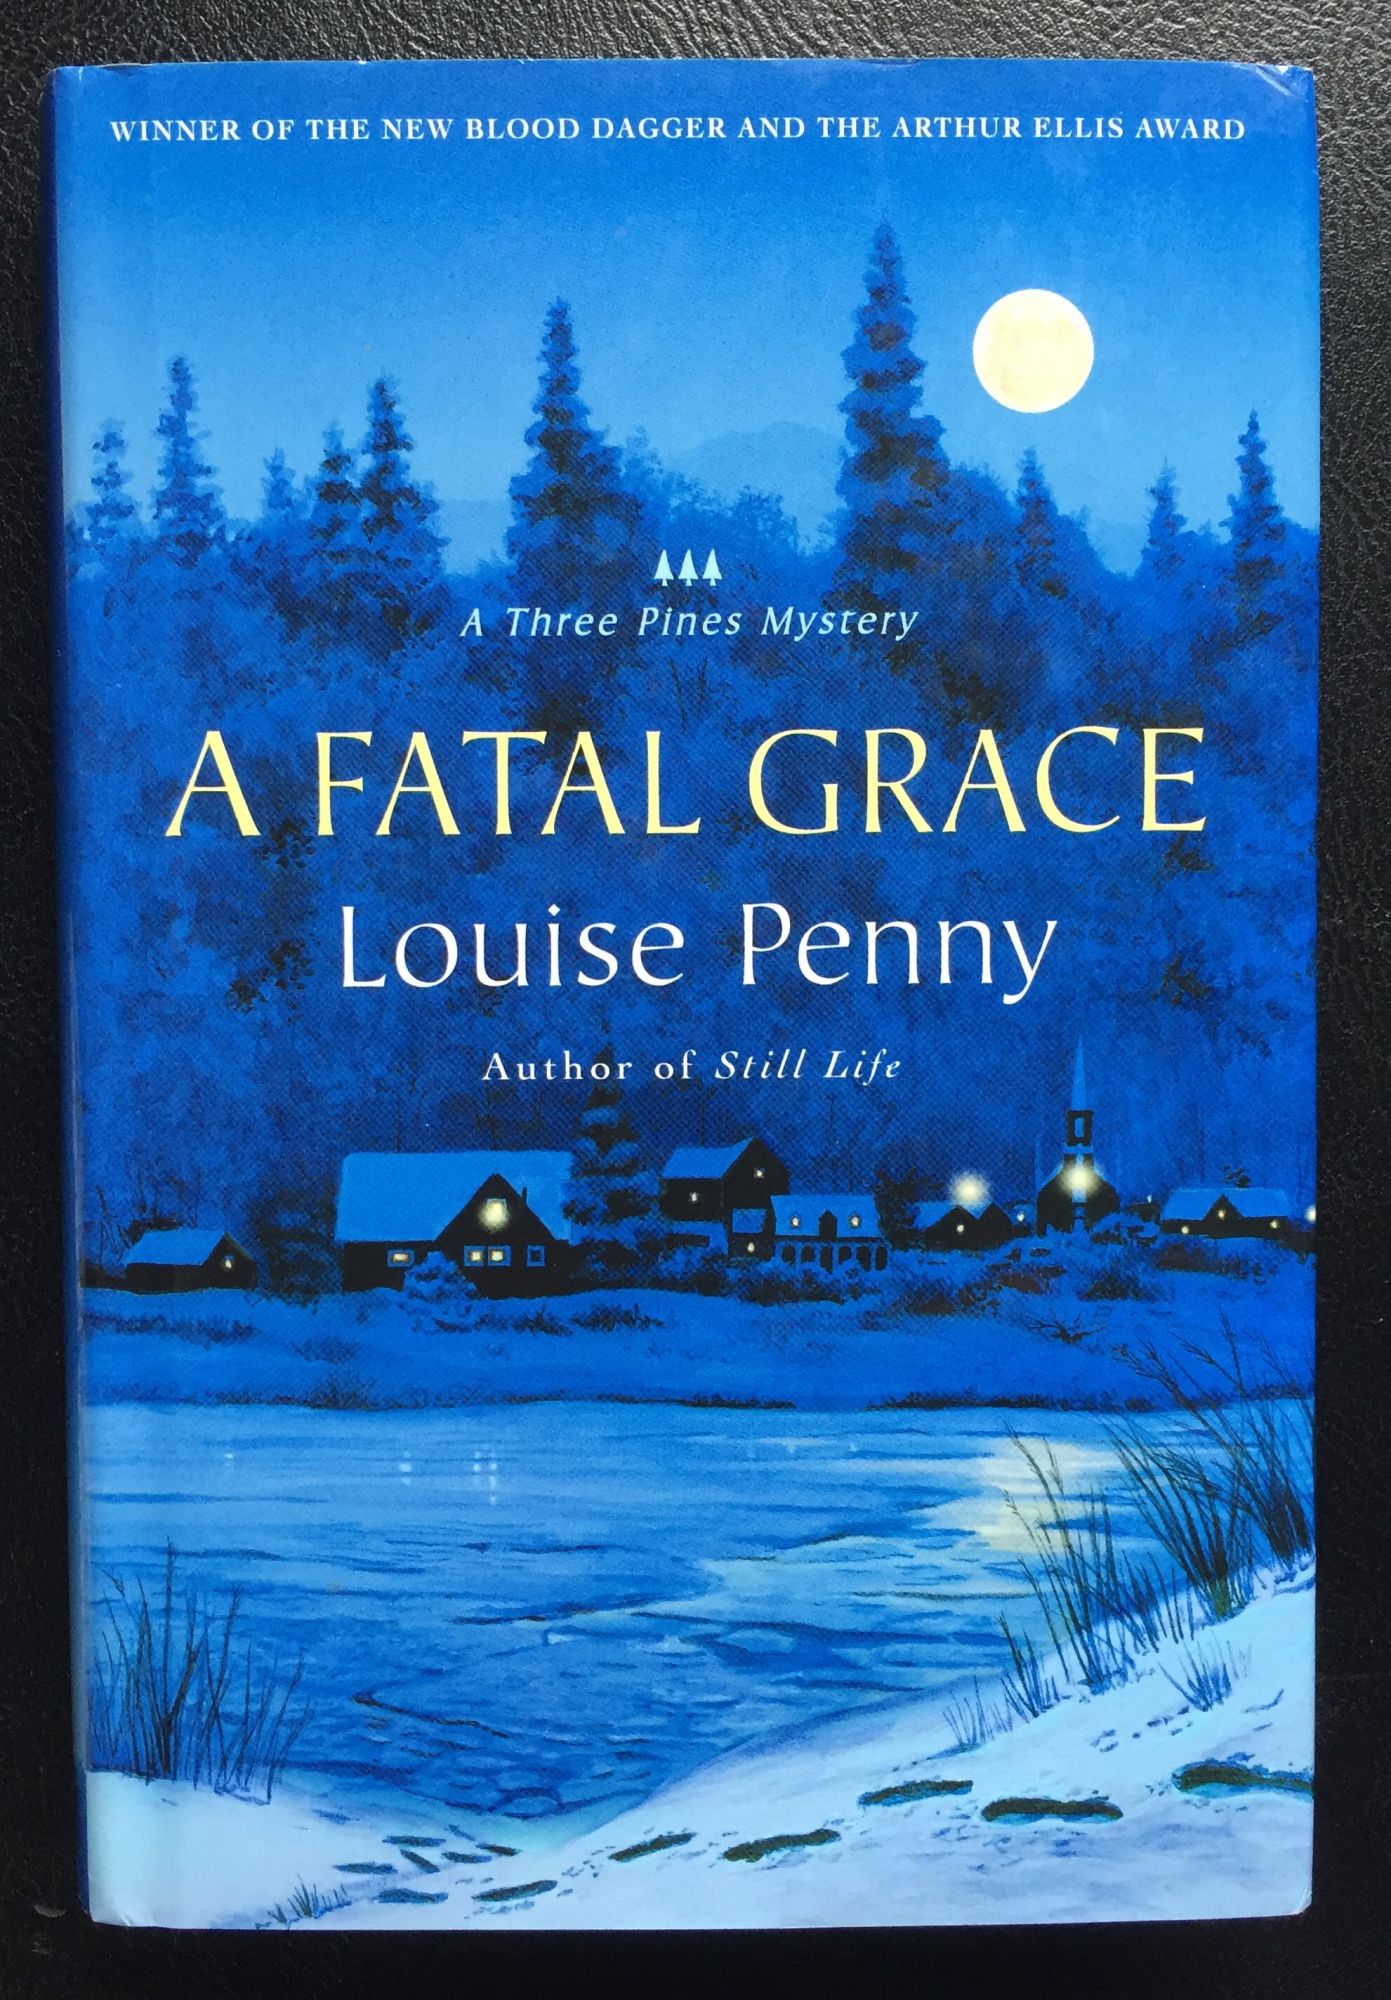 A Fatal Grace by Louise Penny on J. Michaels Books